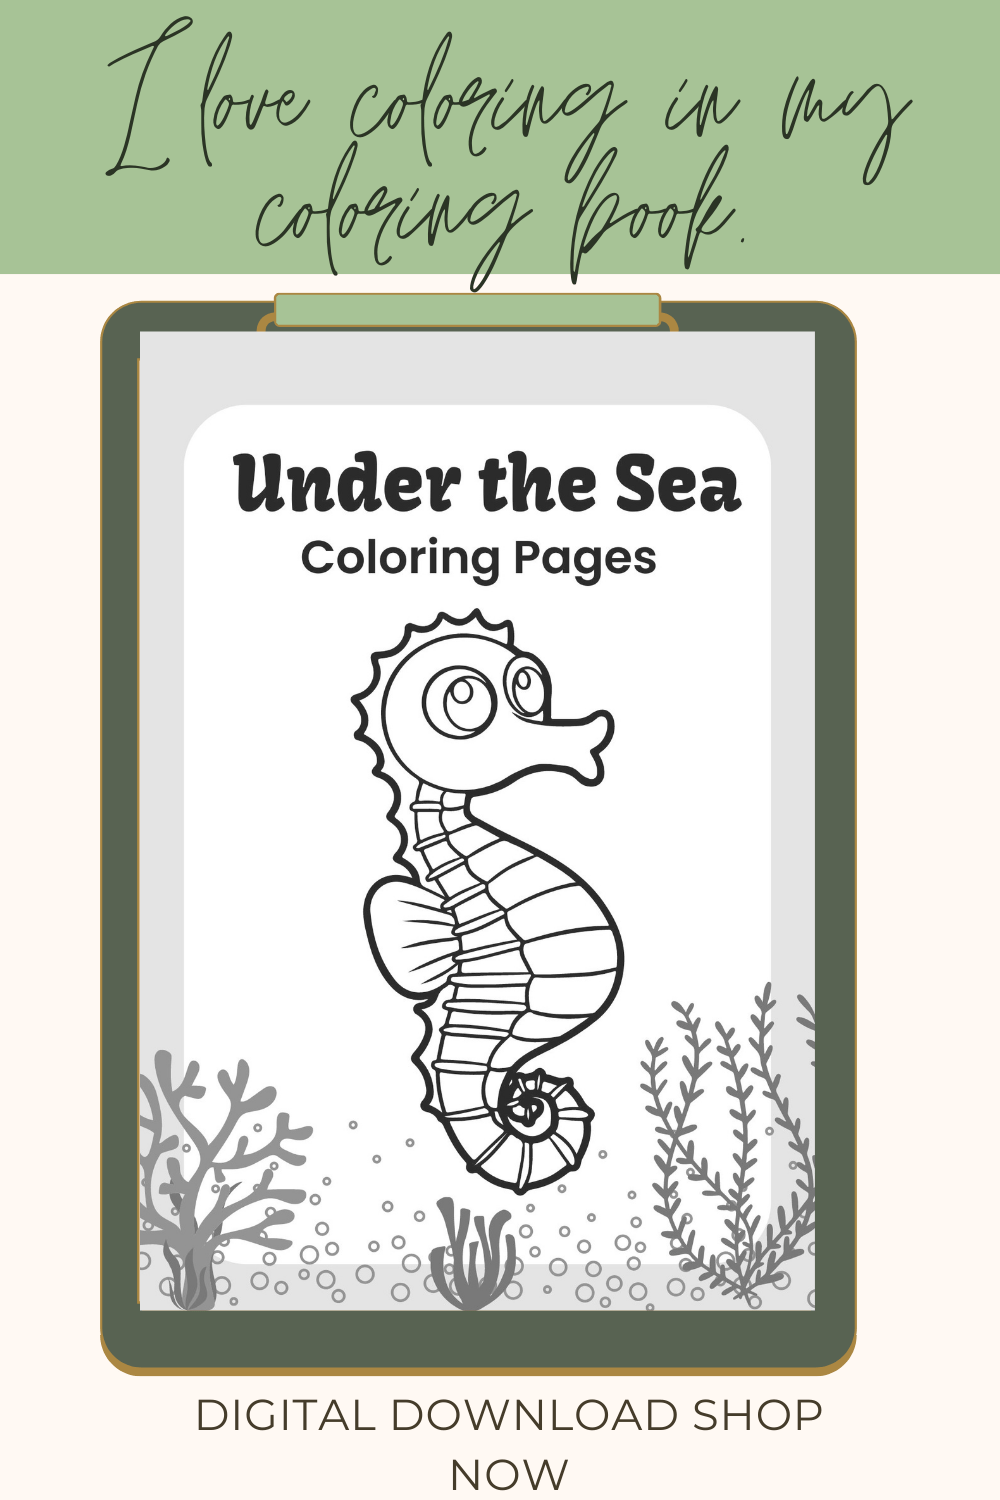 Under the Sea-Coloring Pages pinterest image.